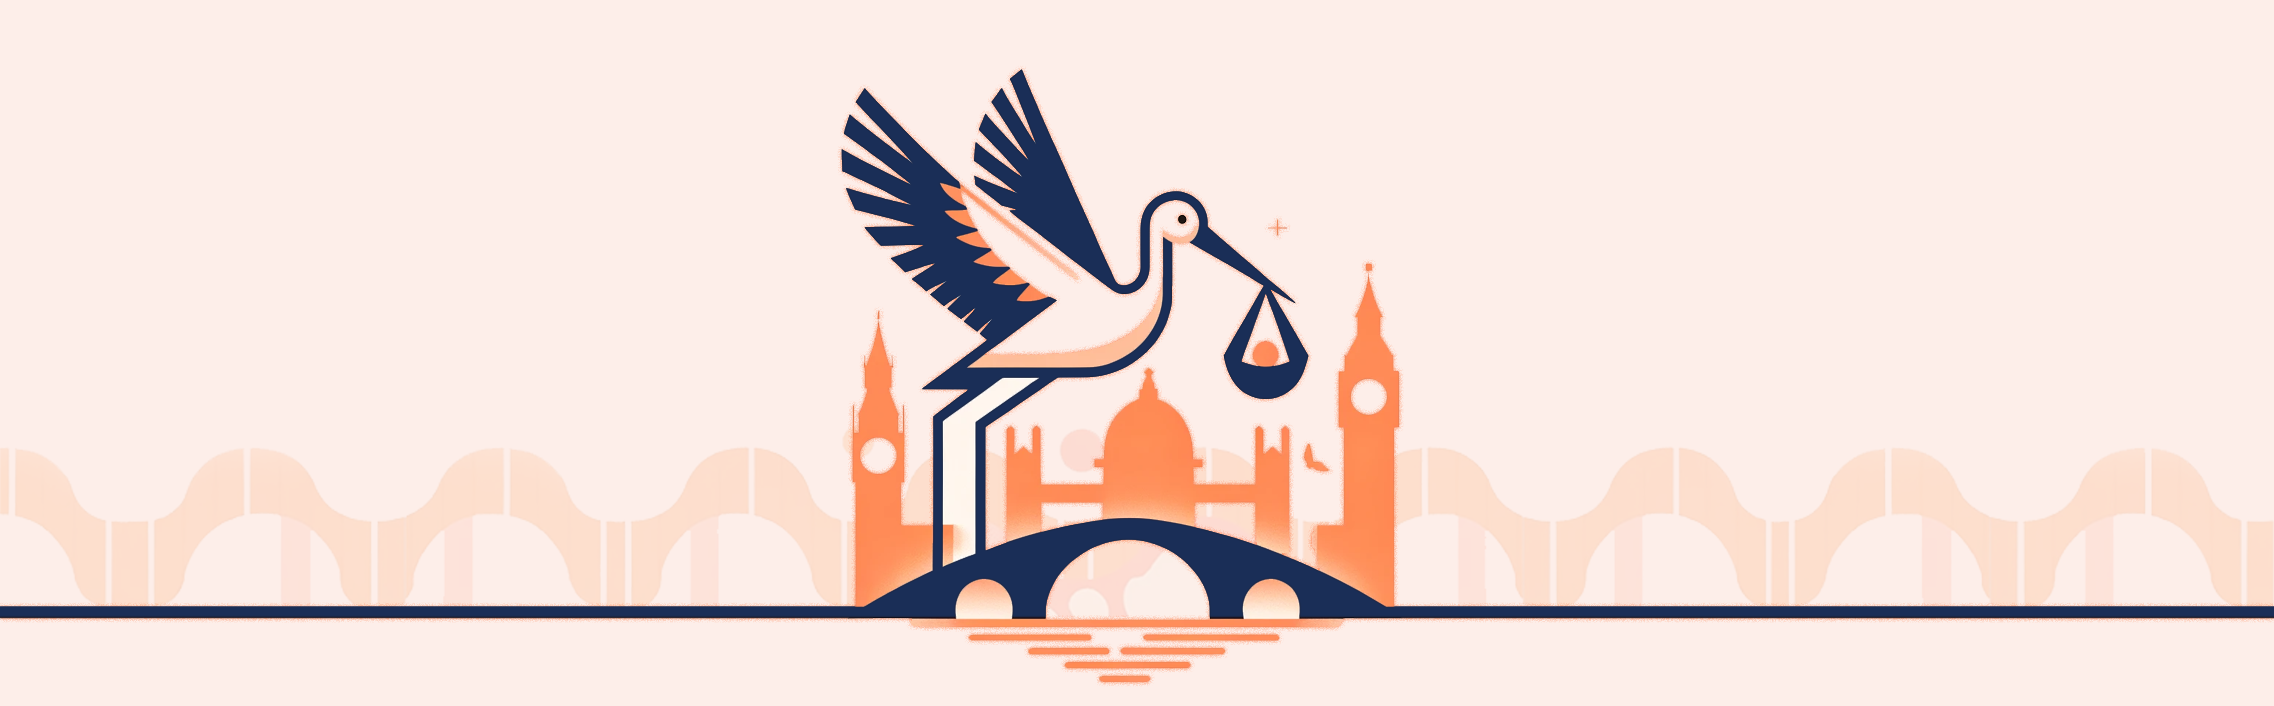 Graphic of a stork carrying a baby over the city of London hospital.